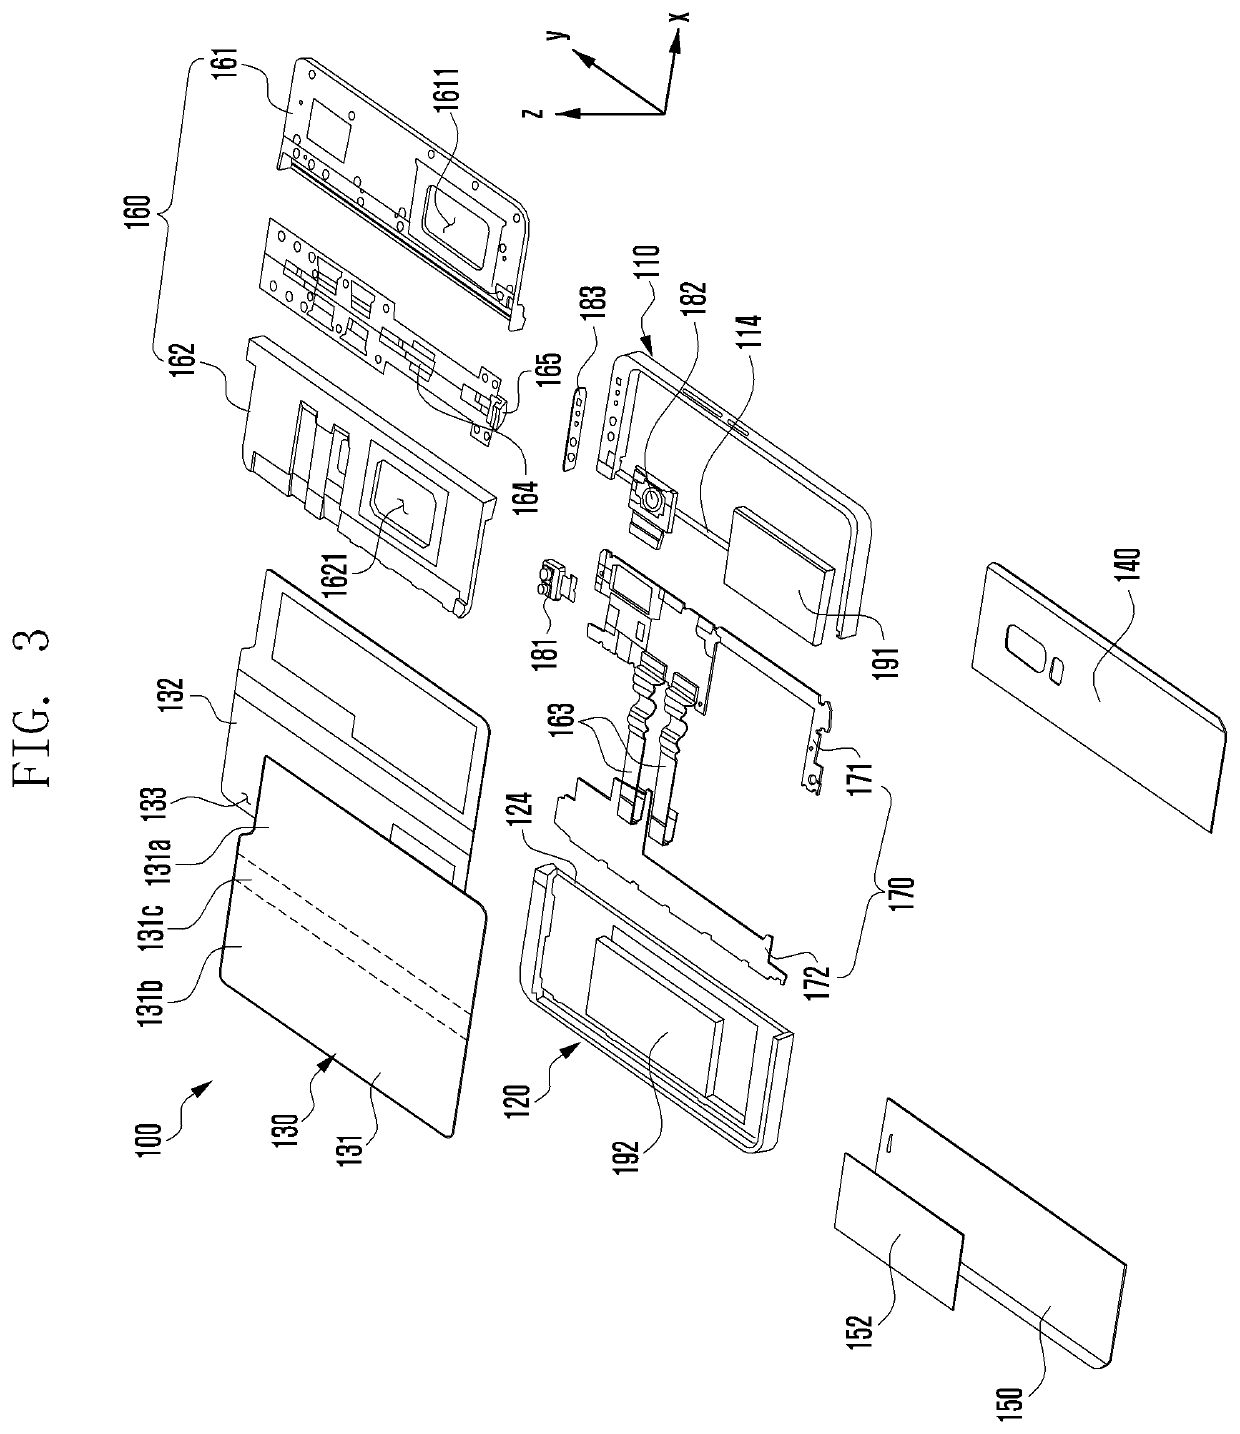 Electronic device including foldable conductive plate